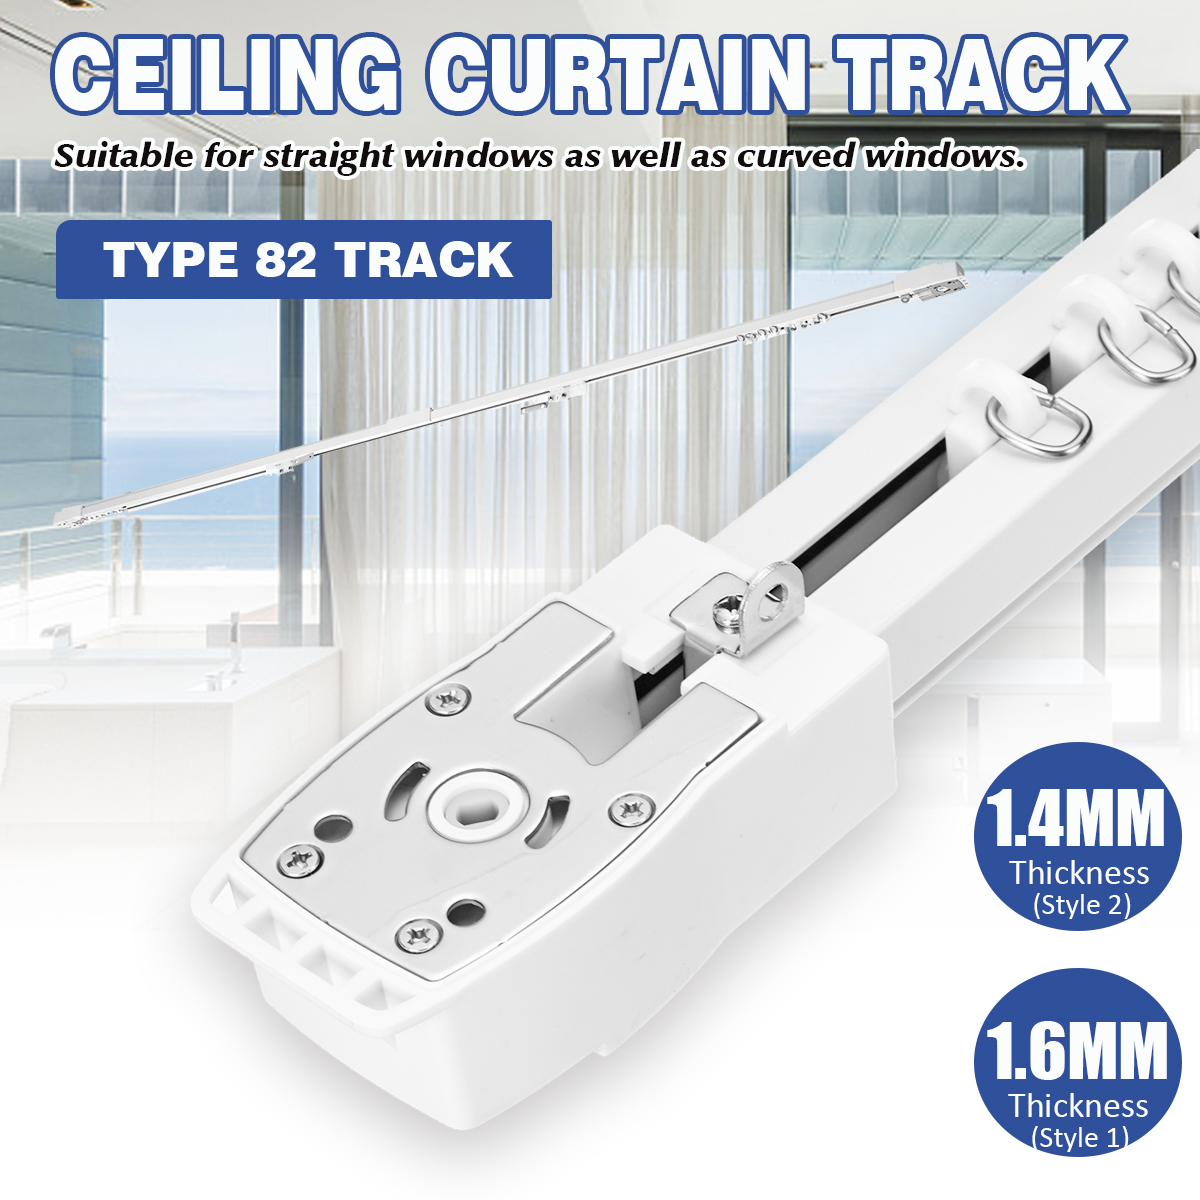 1416mm-Ceiling-Mount-Curtain-Hanging-Track-Rail-Home-Straight-Curve-Window-2M-1862930-2